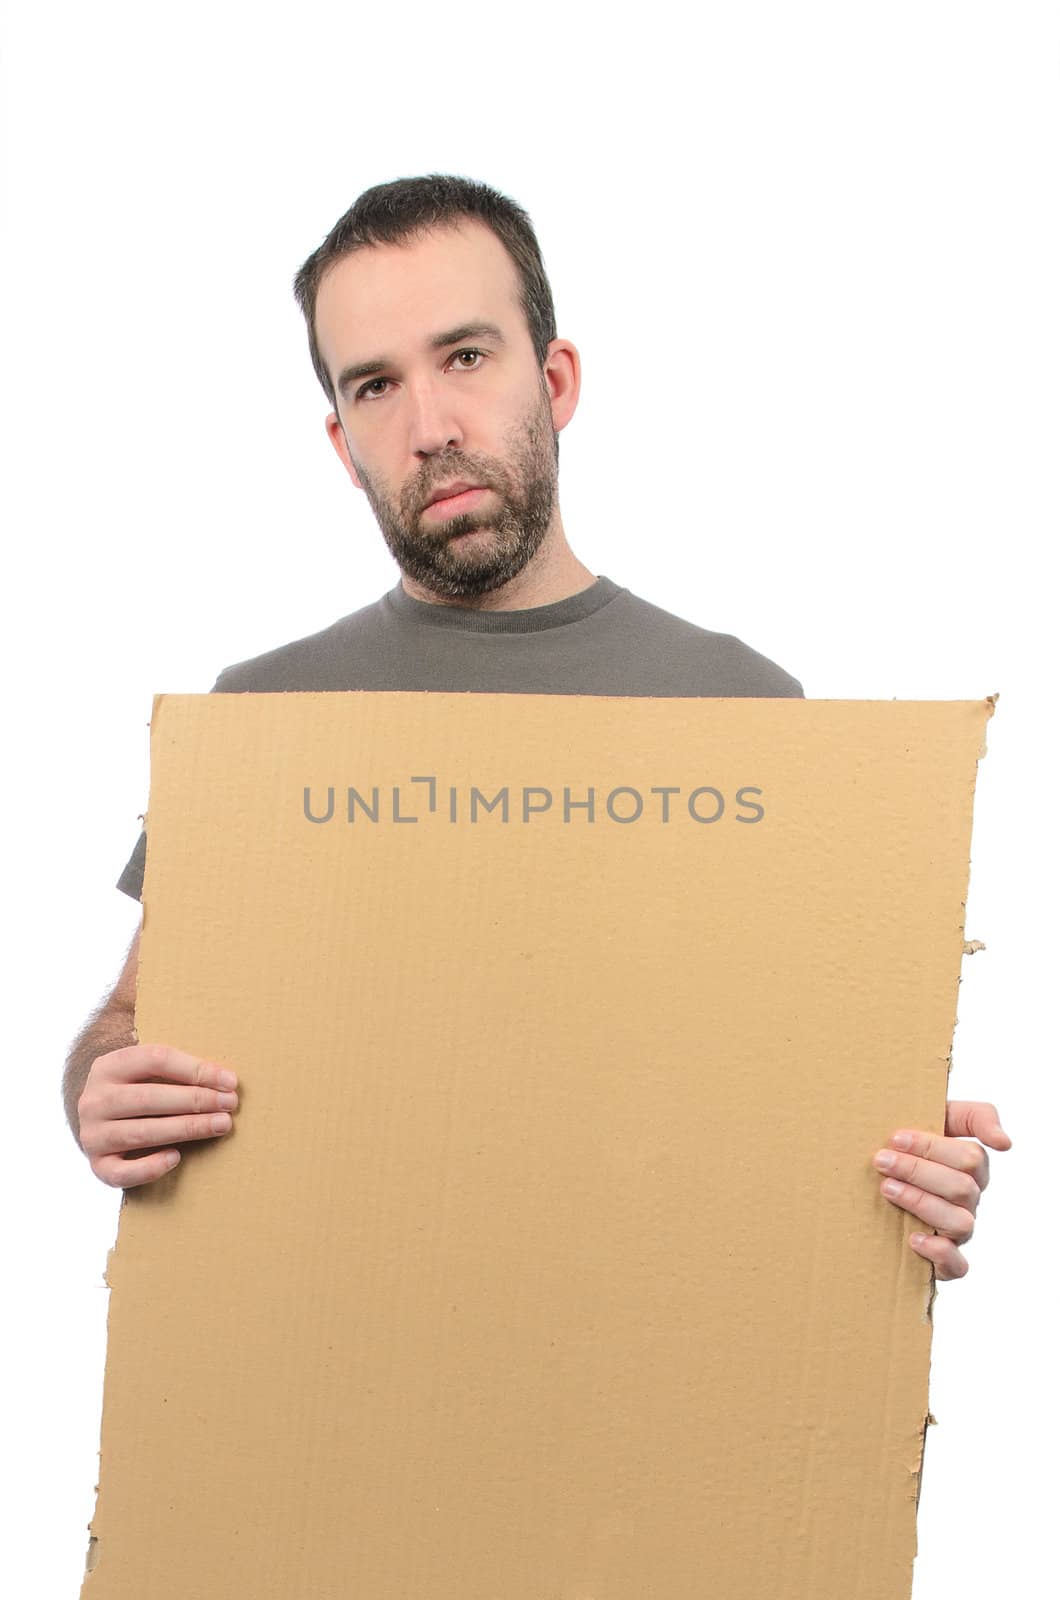 A scruffy looking guy holding a cardboard sign, isolated on a white background.